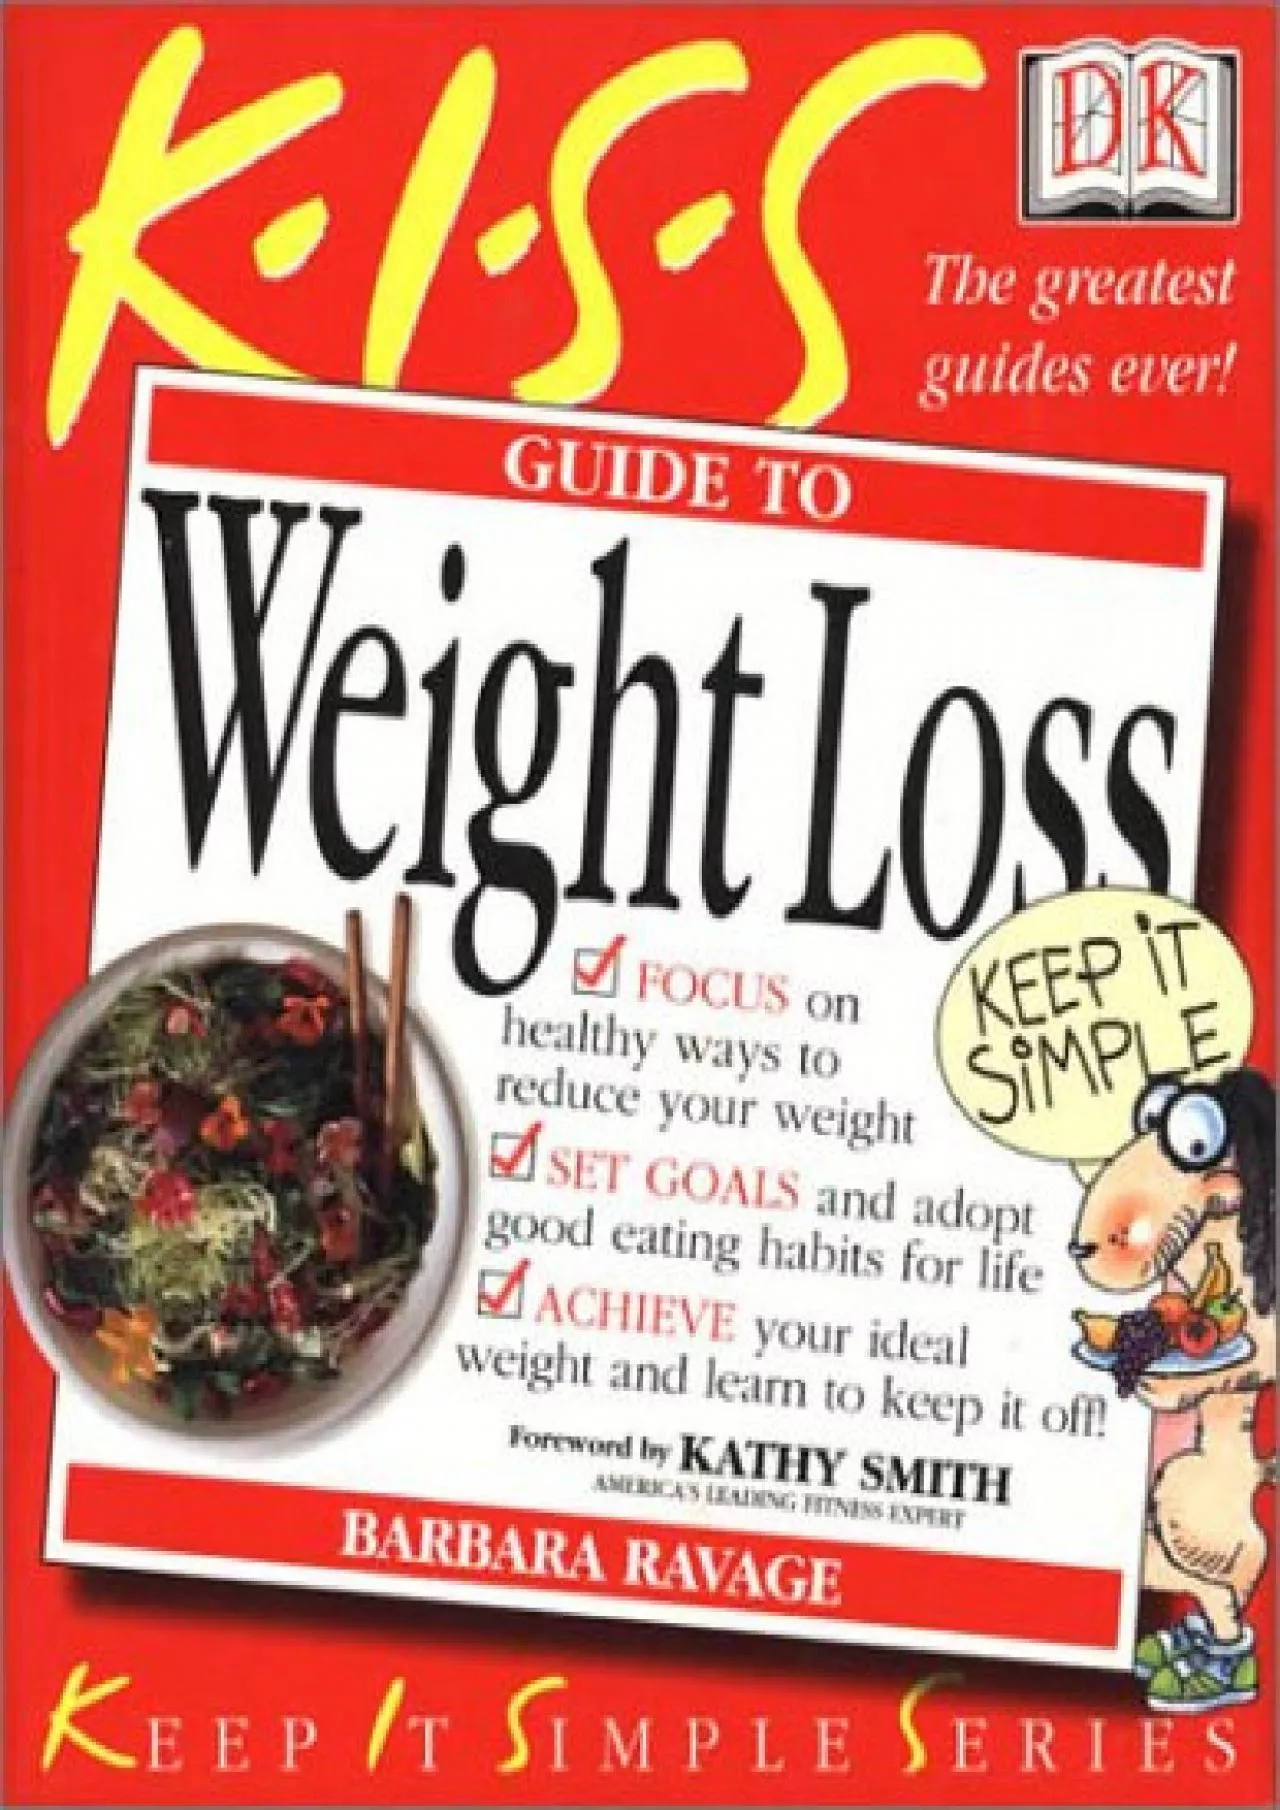 (BOOK)-KISS Guide to Weight Loss